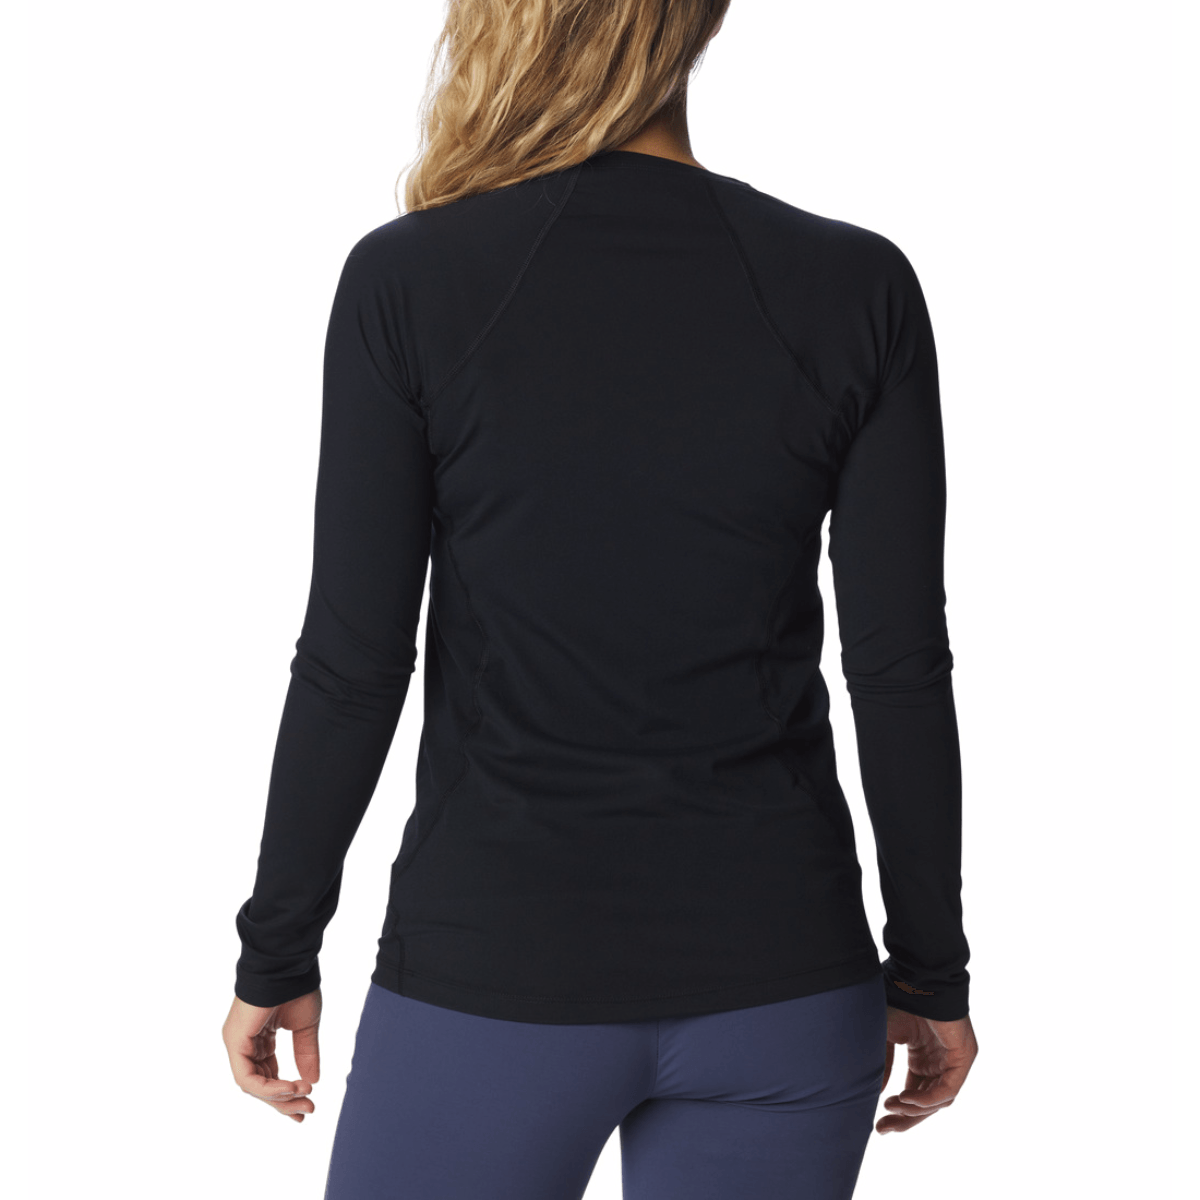 Columbia Midweight Stretch Long-Sleeve Baselayer Top - Women's